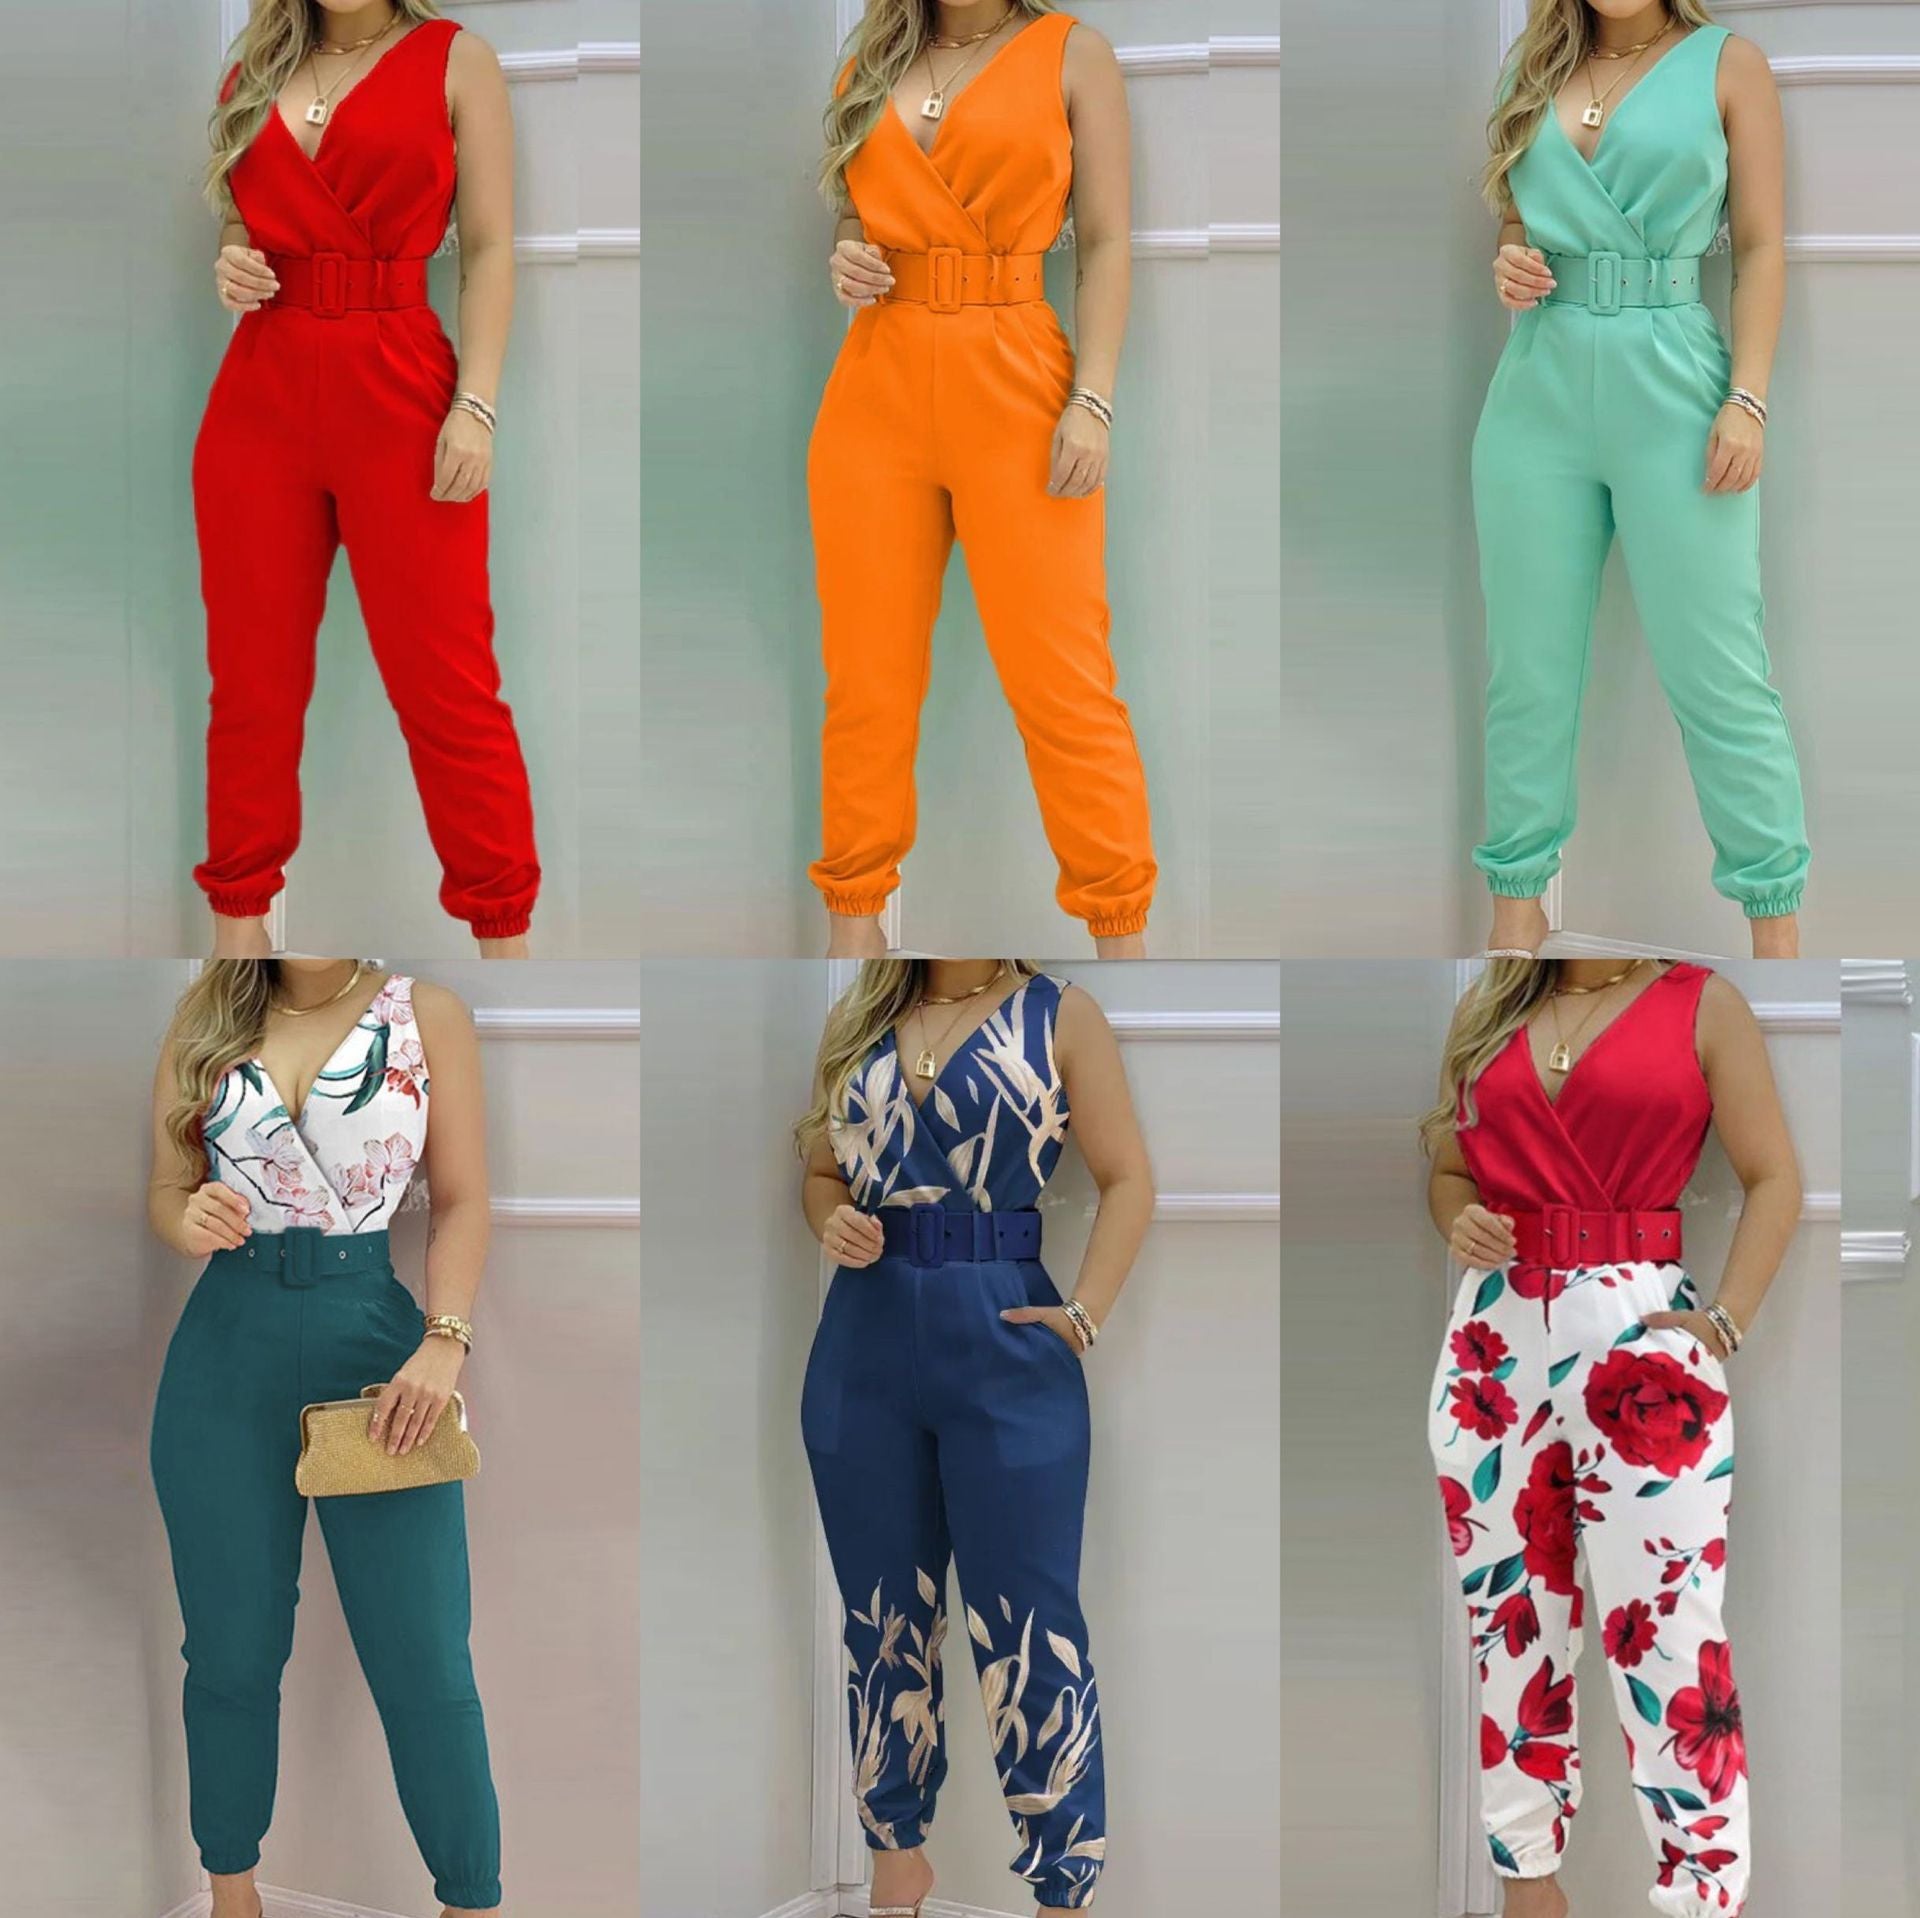 X-collar Slim-fit Sleeveless Positioning Flower Trousers Jumpsuits